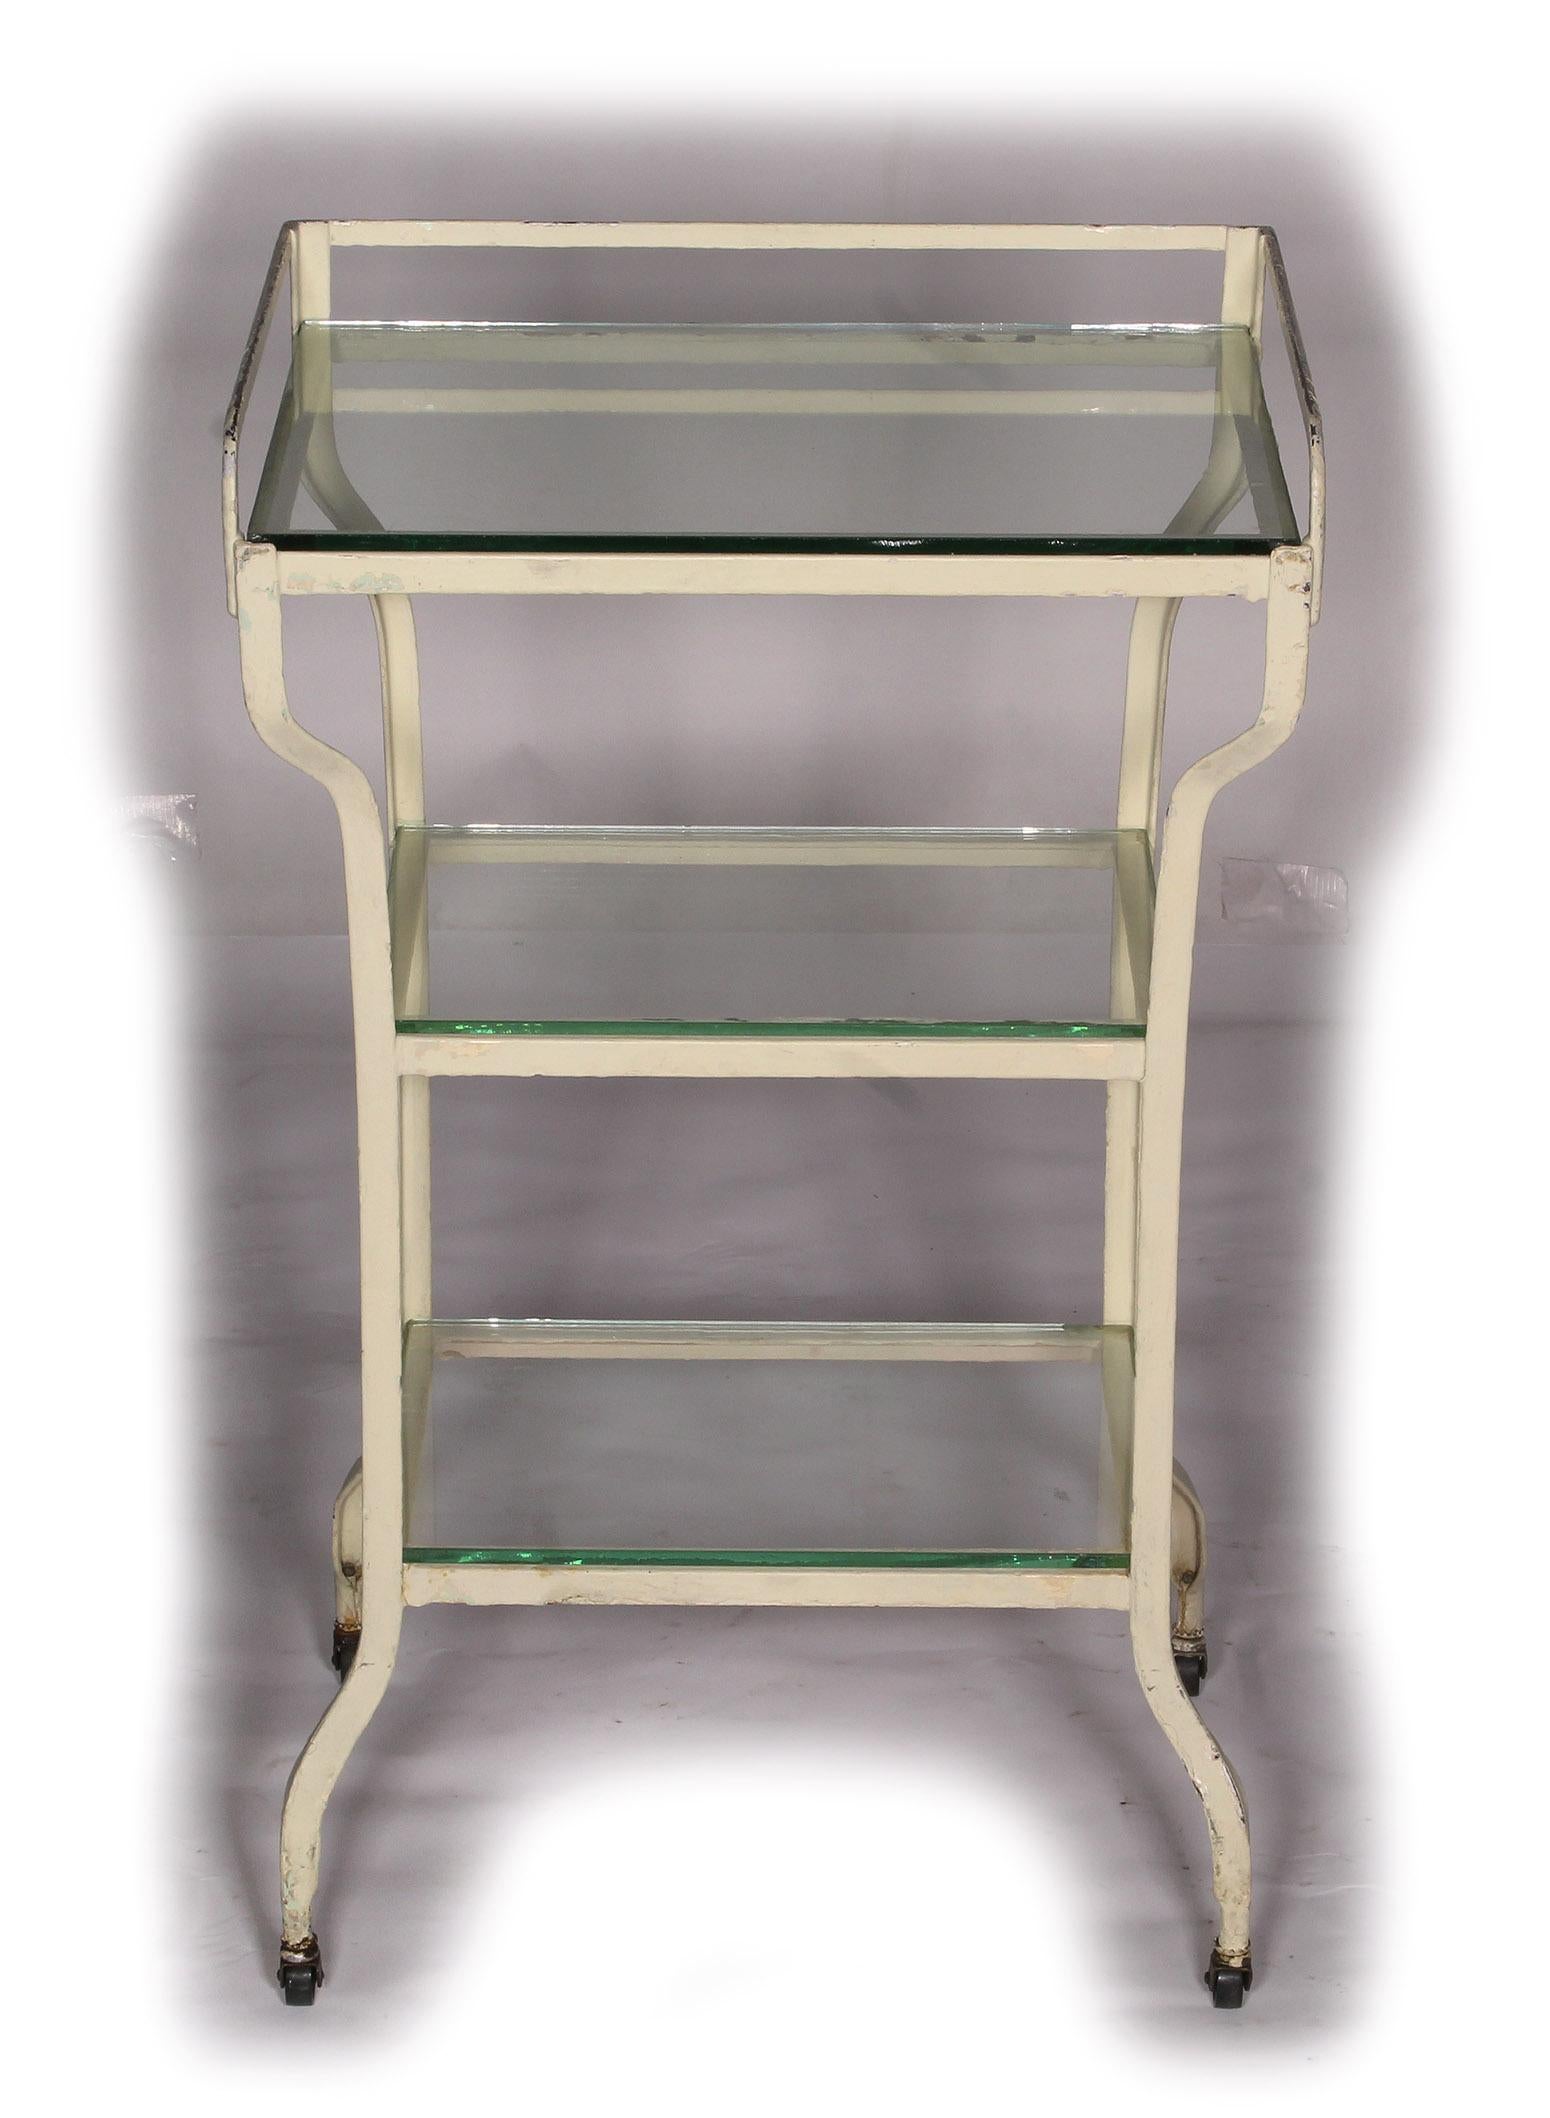 Vintage 3-tier white medical stand on wheels. Also available, matching narrower stand.